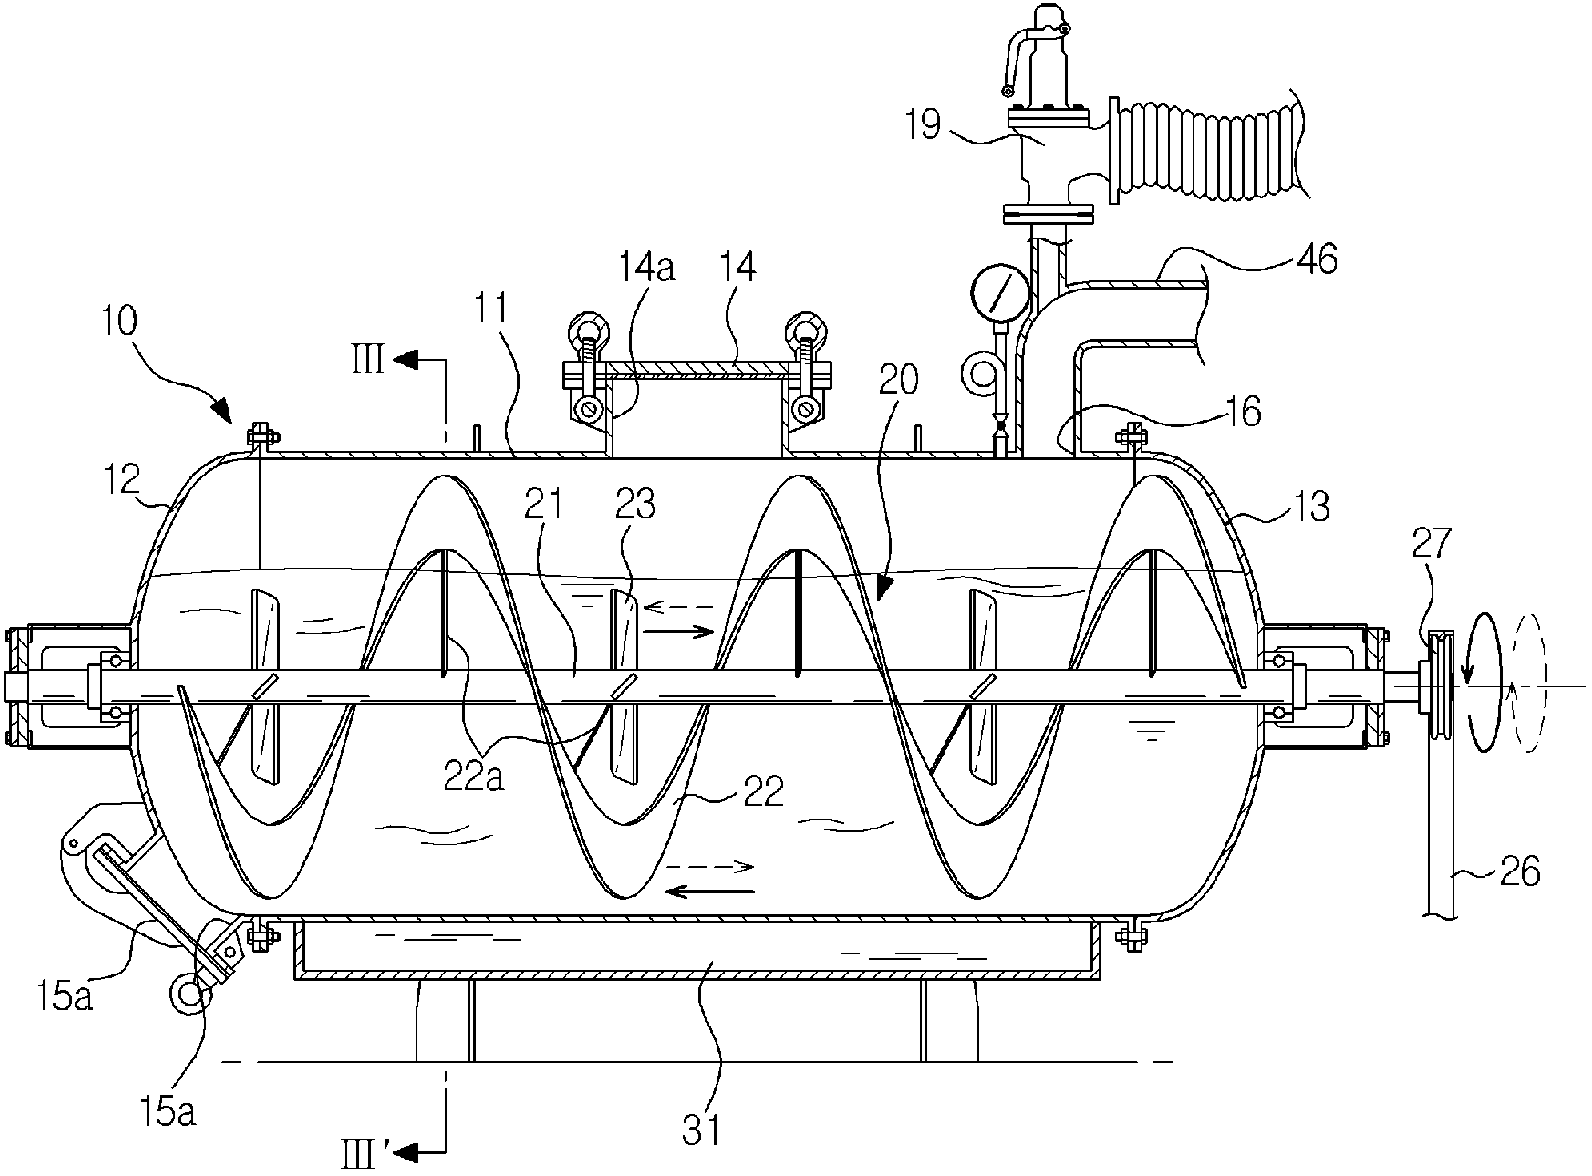 Apparatus and method for treating organic waste